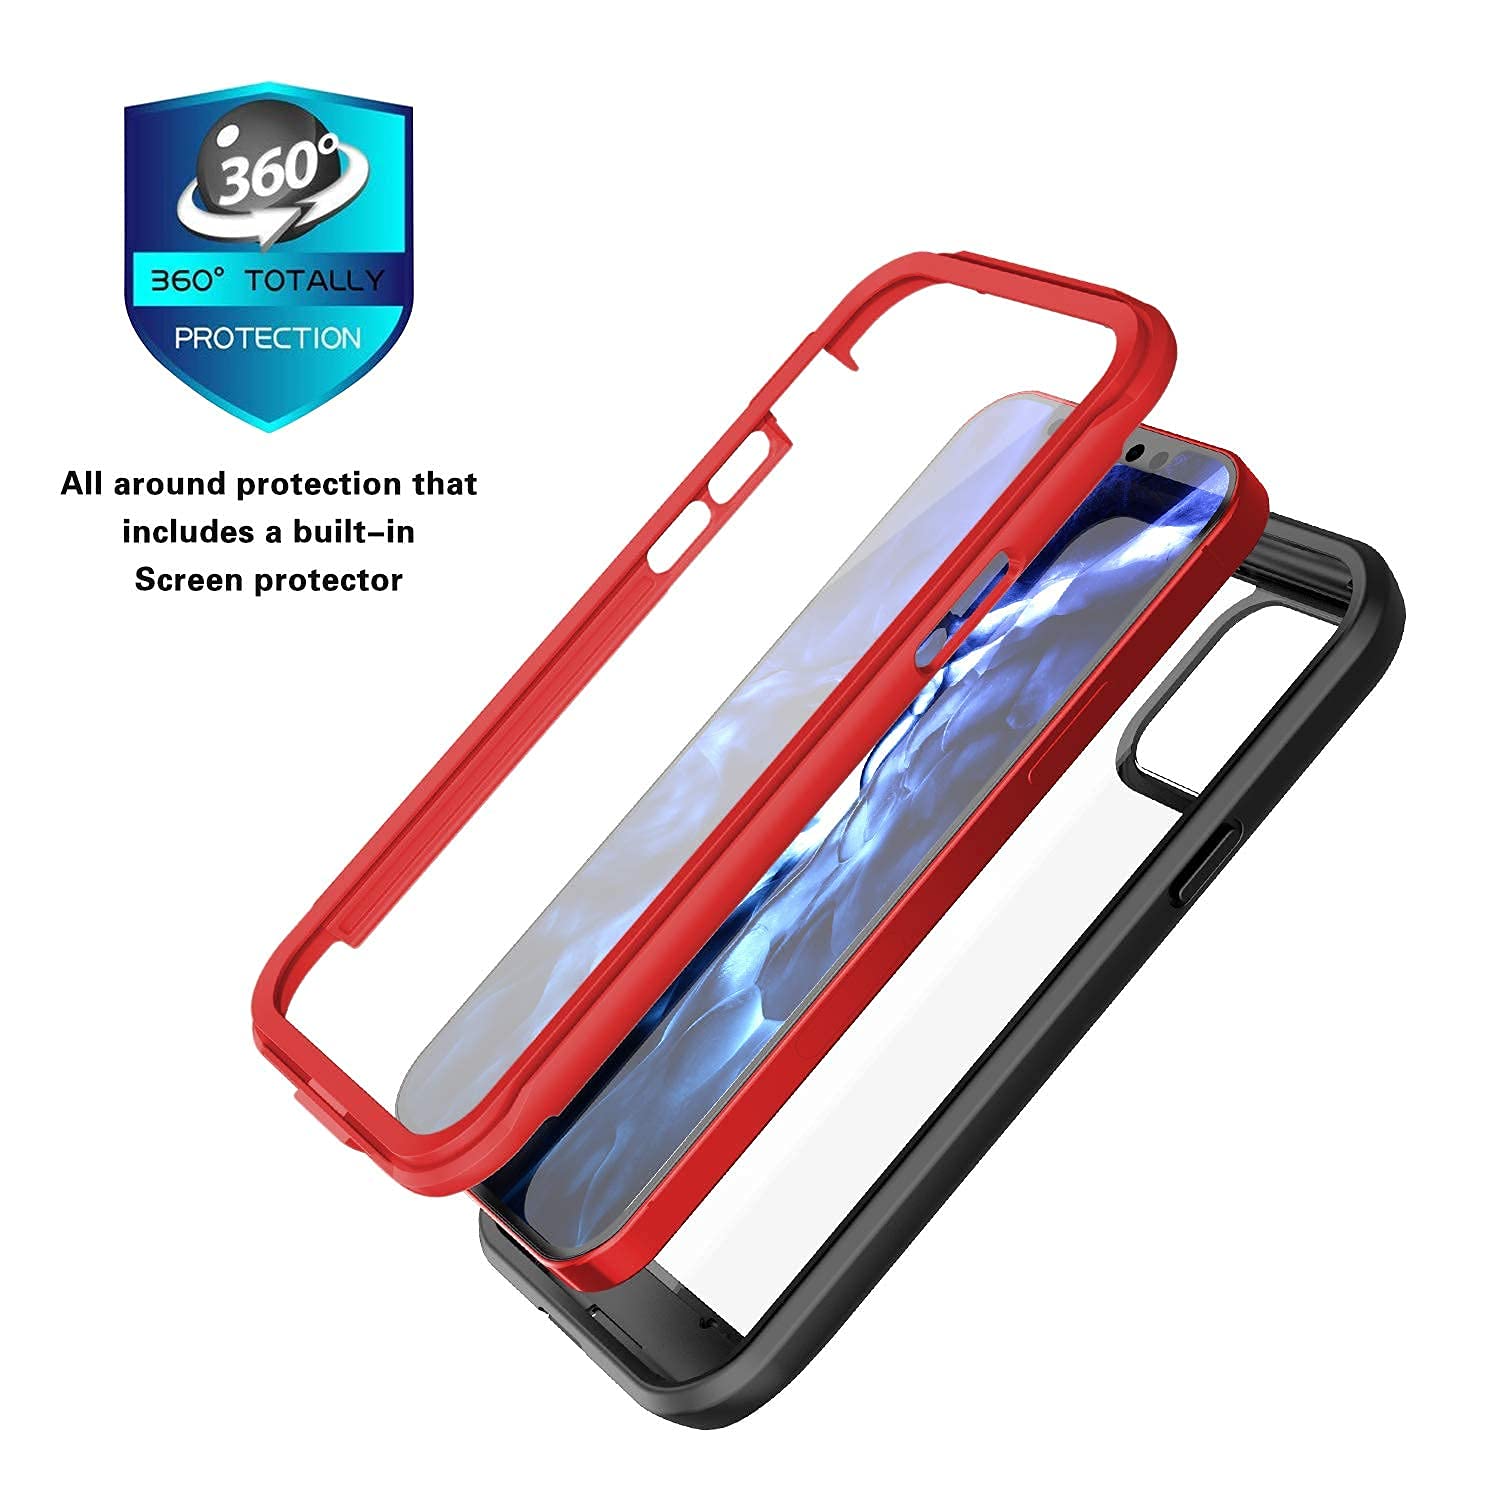 ImpactStrong Clear Case for iPhone 12/iPhone 12 Pro, Ultra Protective Case with Built-in Clear Screen Protector Full Body Cover (Red)